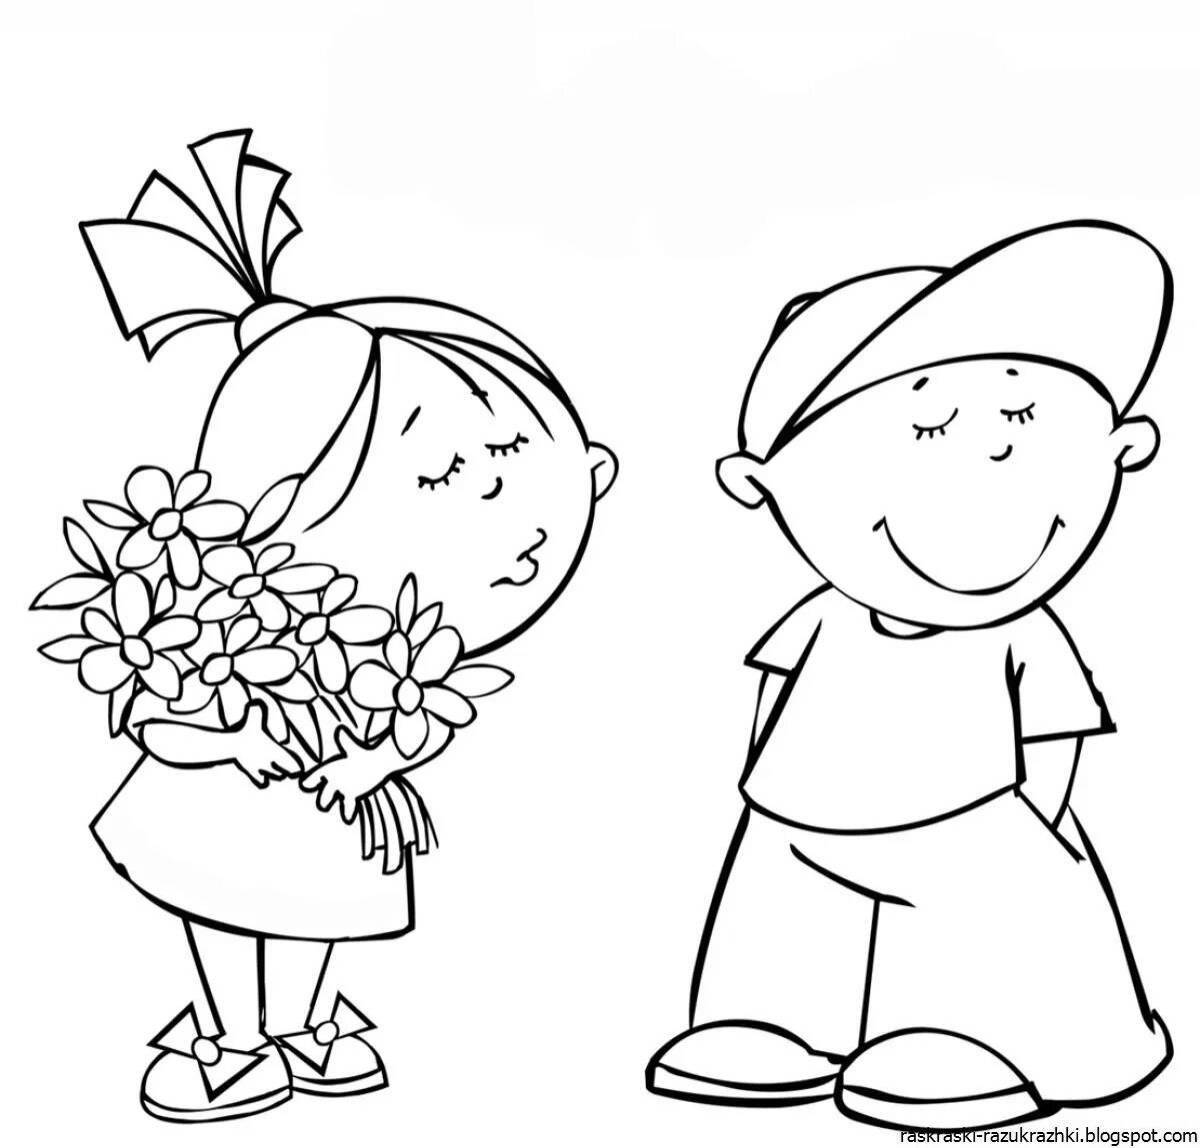 Adorable coloring book for boys and girls